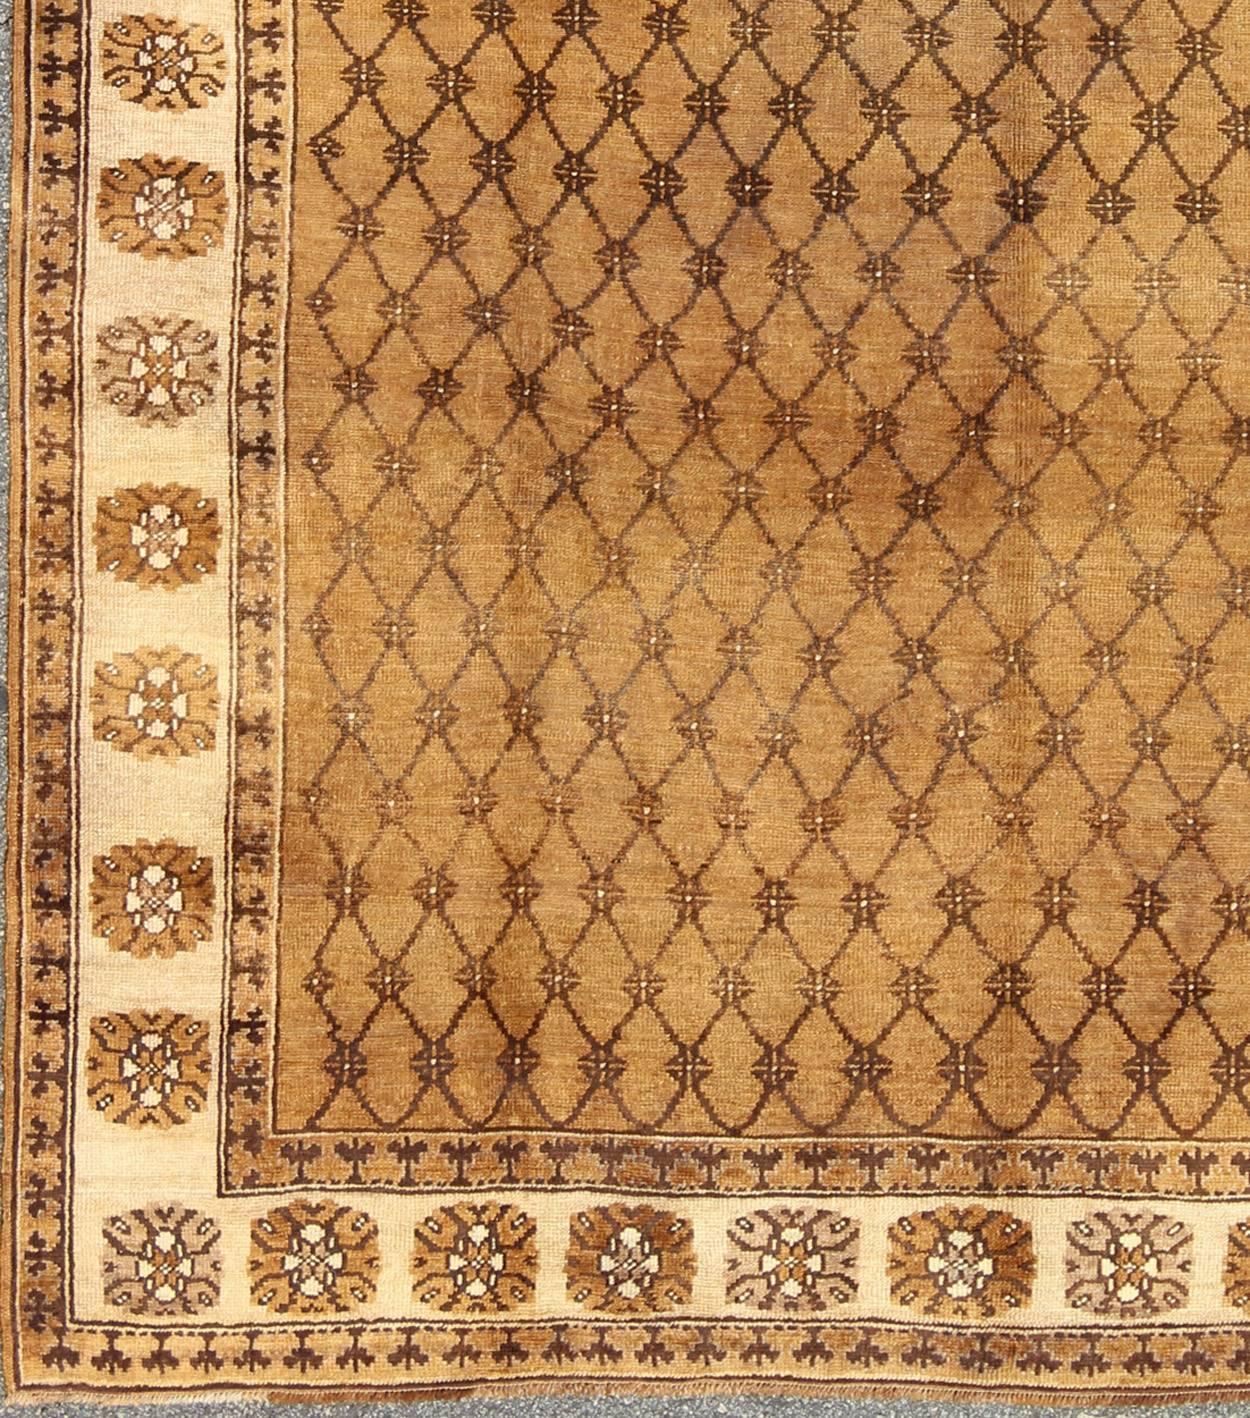 Vintage Turkish Rug in Natural Colors of Brown, Mocha and Cream and a Modern Design
This gorgeous Turkish rug from eastern Turkey features a sophisticated all-over, repeating diamond and blossom pattern. A repeating pattern floral border surrounds